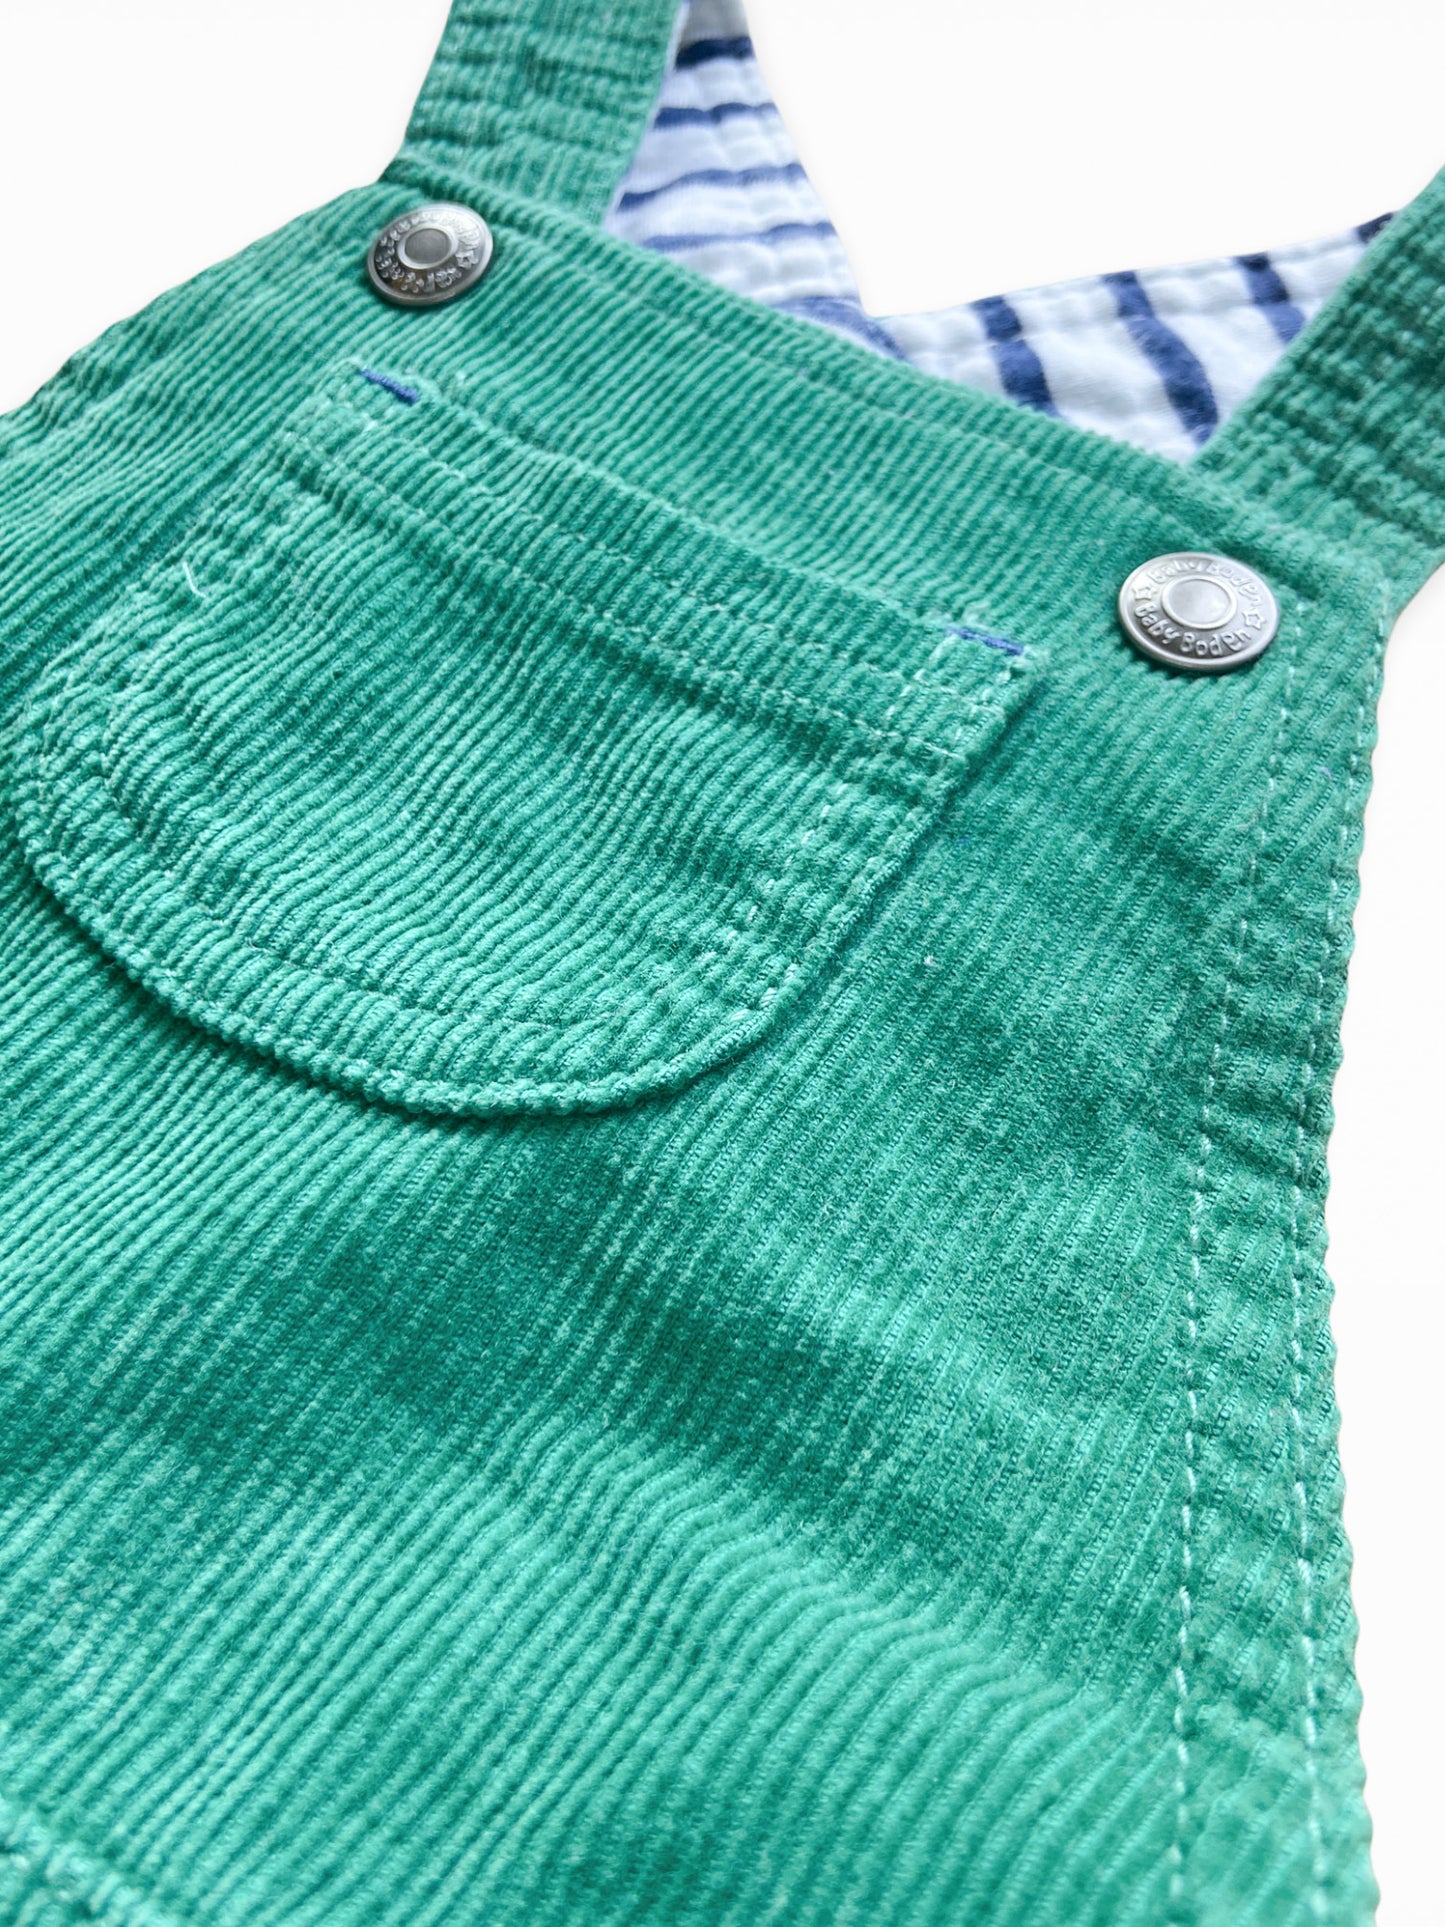 12-18 M Green cord dungarees